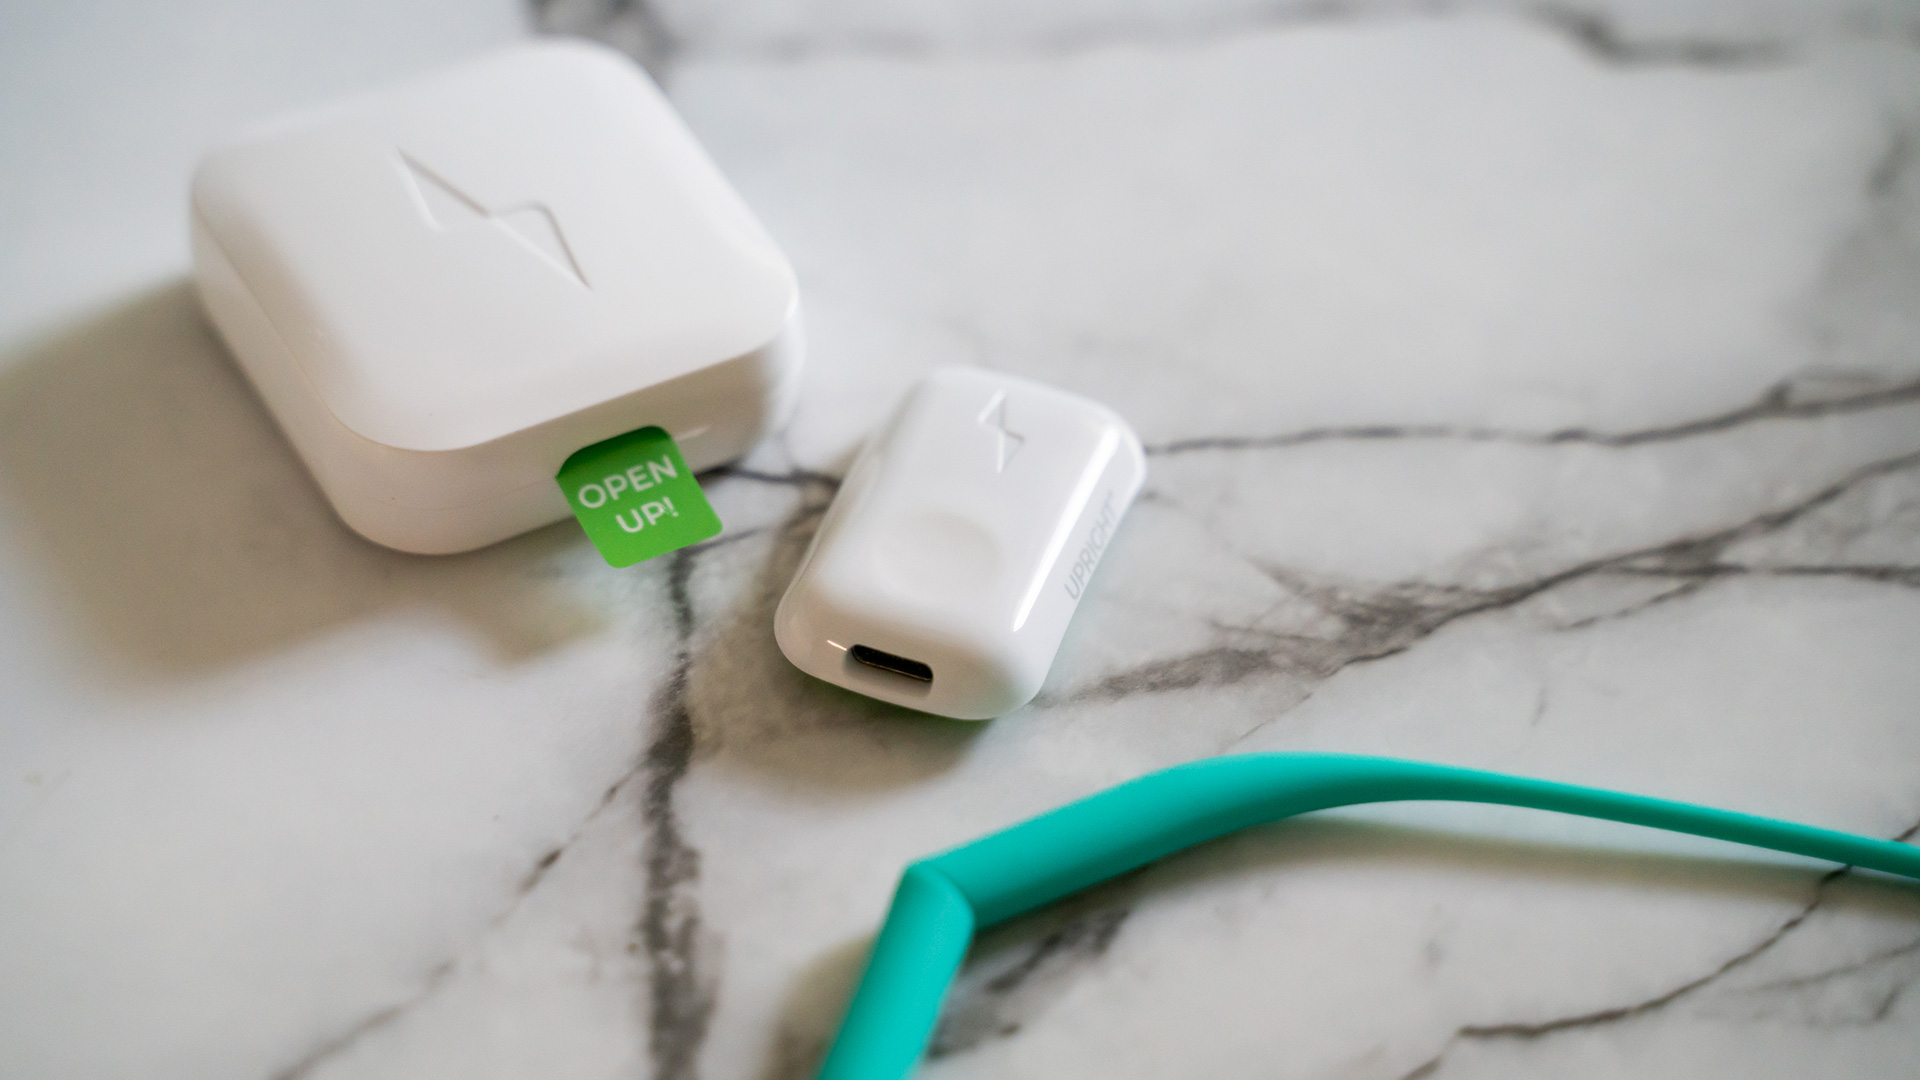 Upright Go 2 Review: A Posture Trainer That Works